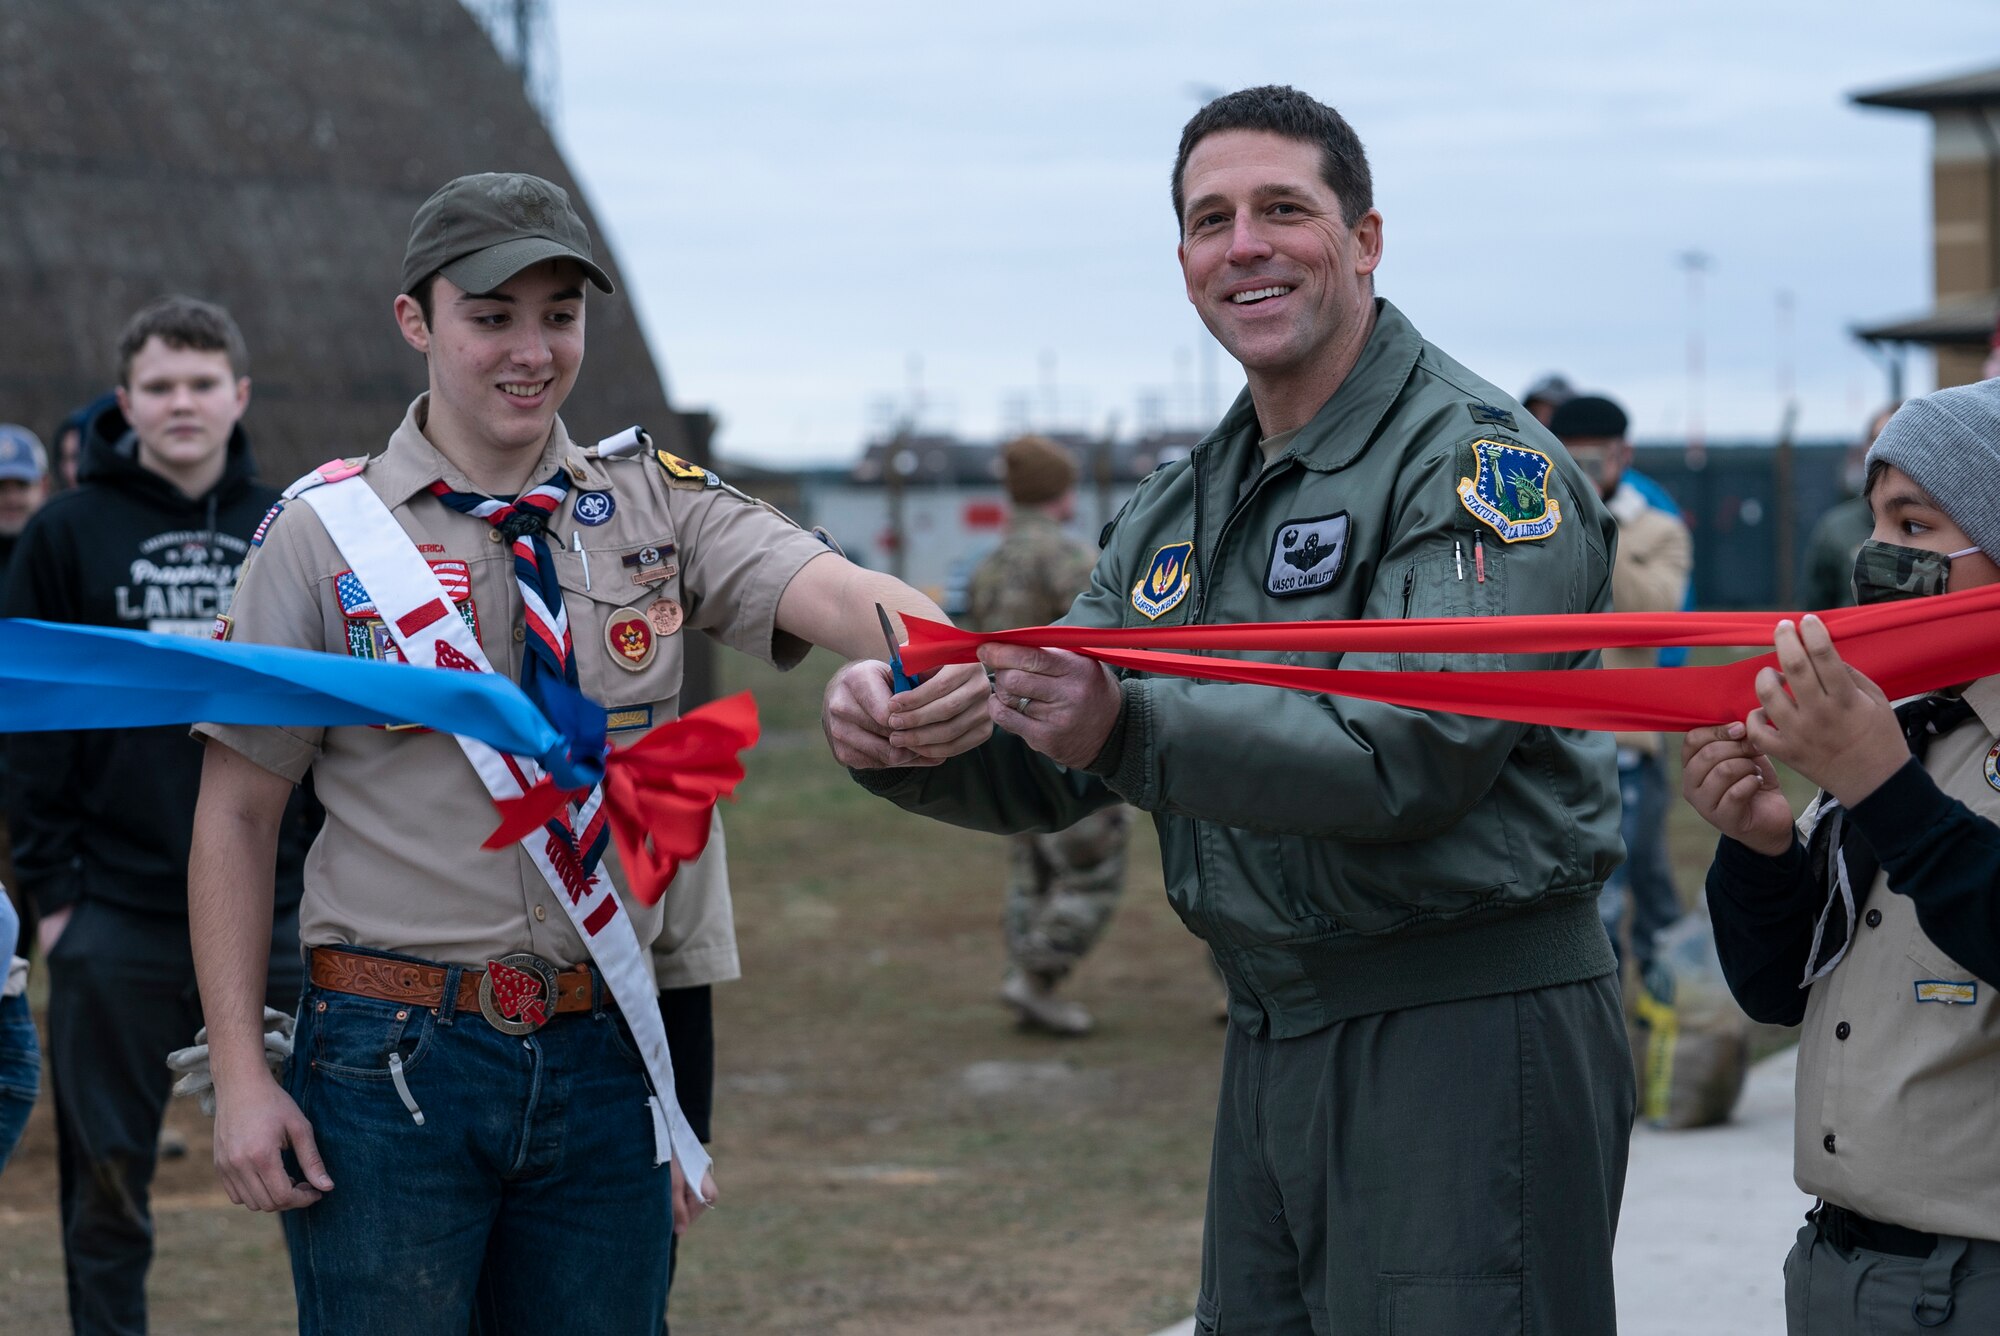 U.S. Air Force Col. Jason Camilletti, 48th Fighter Wing commander, and Cole Heard, son of Lt. Colonel Jason Heard, 48th Fighter Wing Chief of Plans and Programs, cut the ribbon to signify the official opening of the heritage arch outside the Strike Eagle Complex at Royal Air Force Lakenheath, England, March 6, 2021. The arch was built as an Eagle Scout project, an opportunity for a Scout to demonstrate leadership abilities while completing a project for the benefit of their community. (U.S. Air Force photo by Airman 1st Class Jessi Monte)